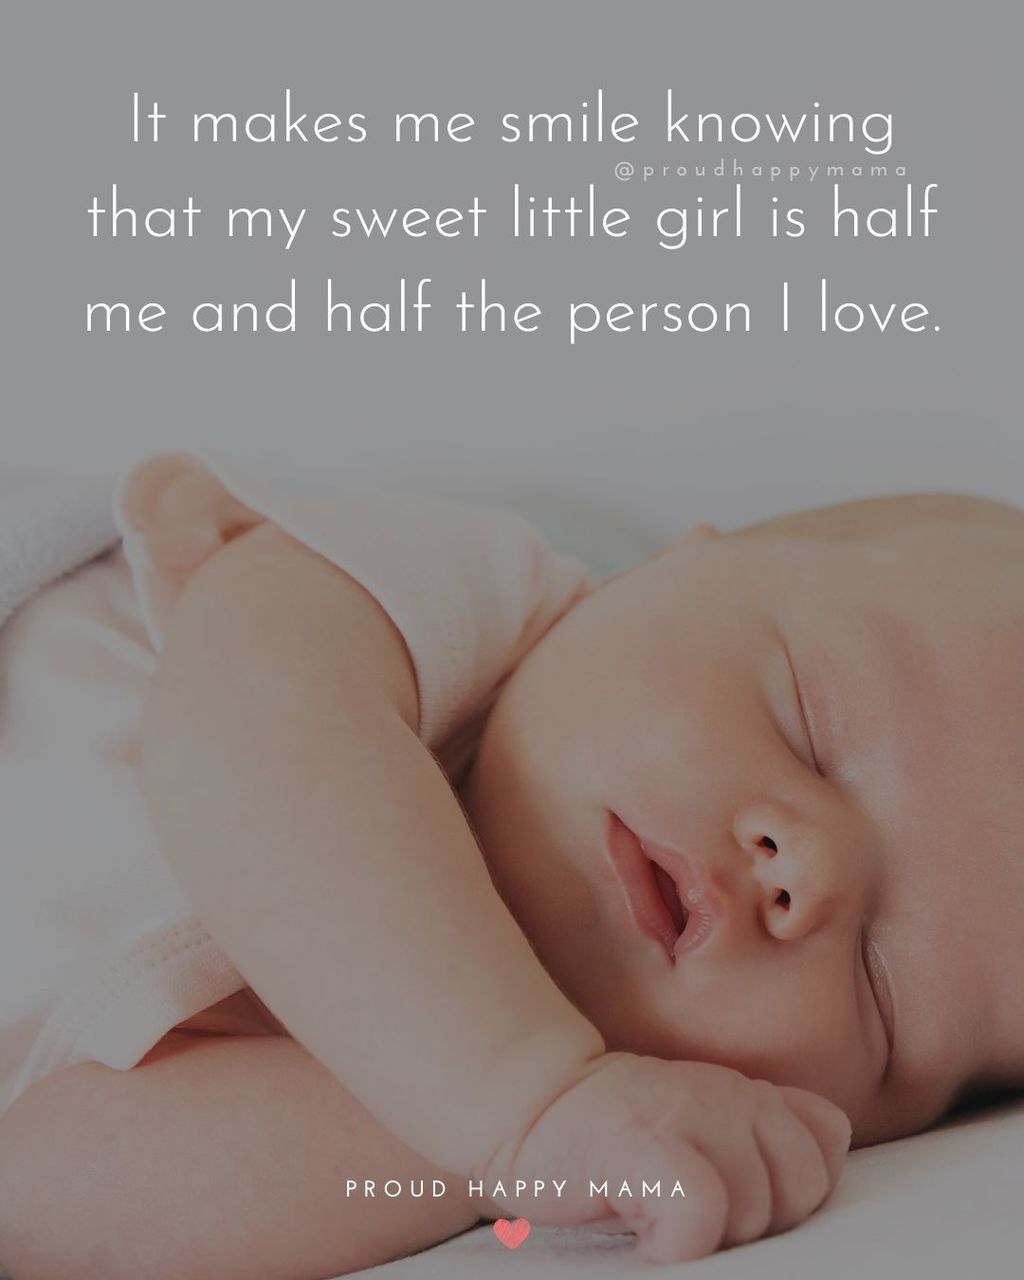 Baby Girl Quotes - It makes me smile knowing that my sweet little girl is half me and half the person I love.